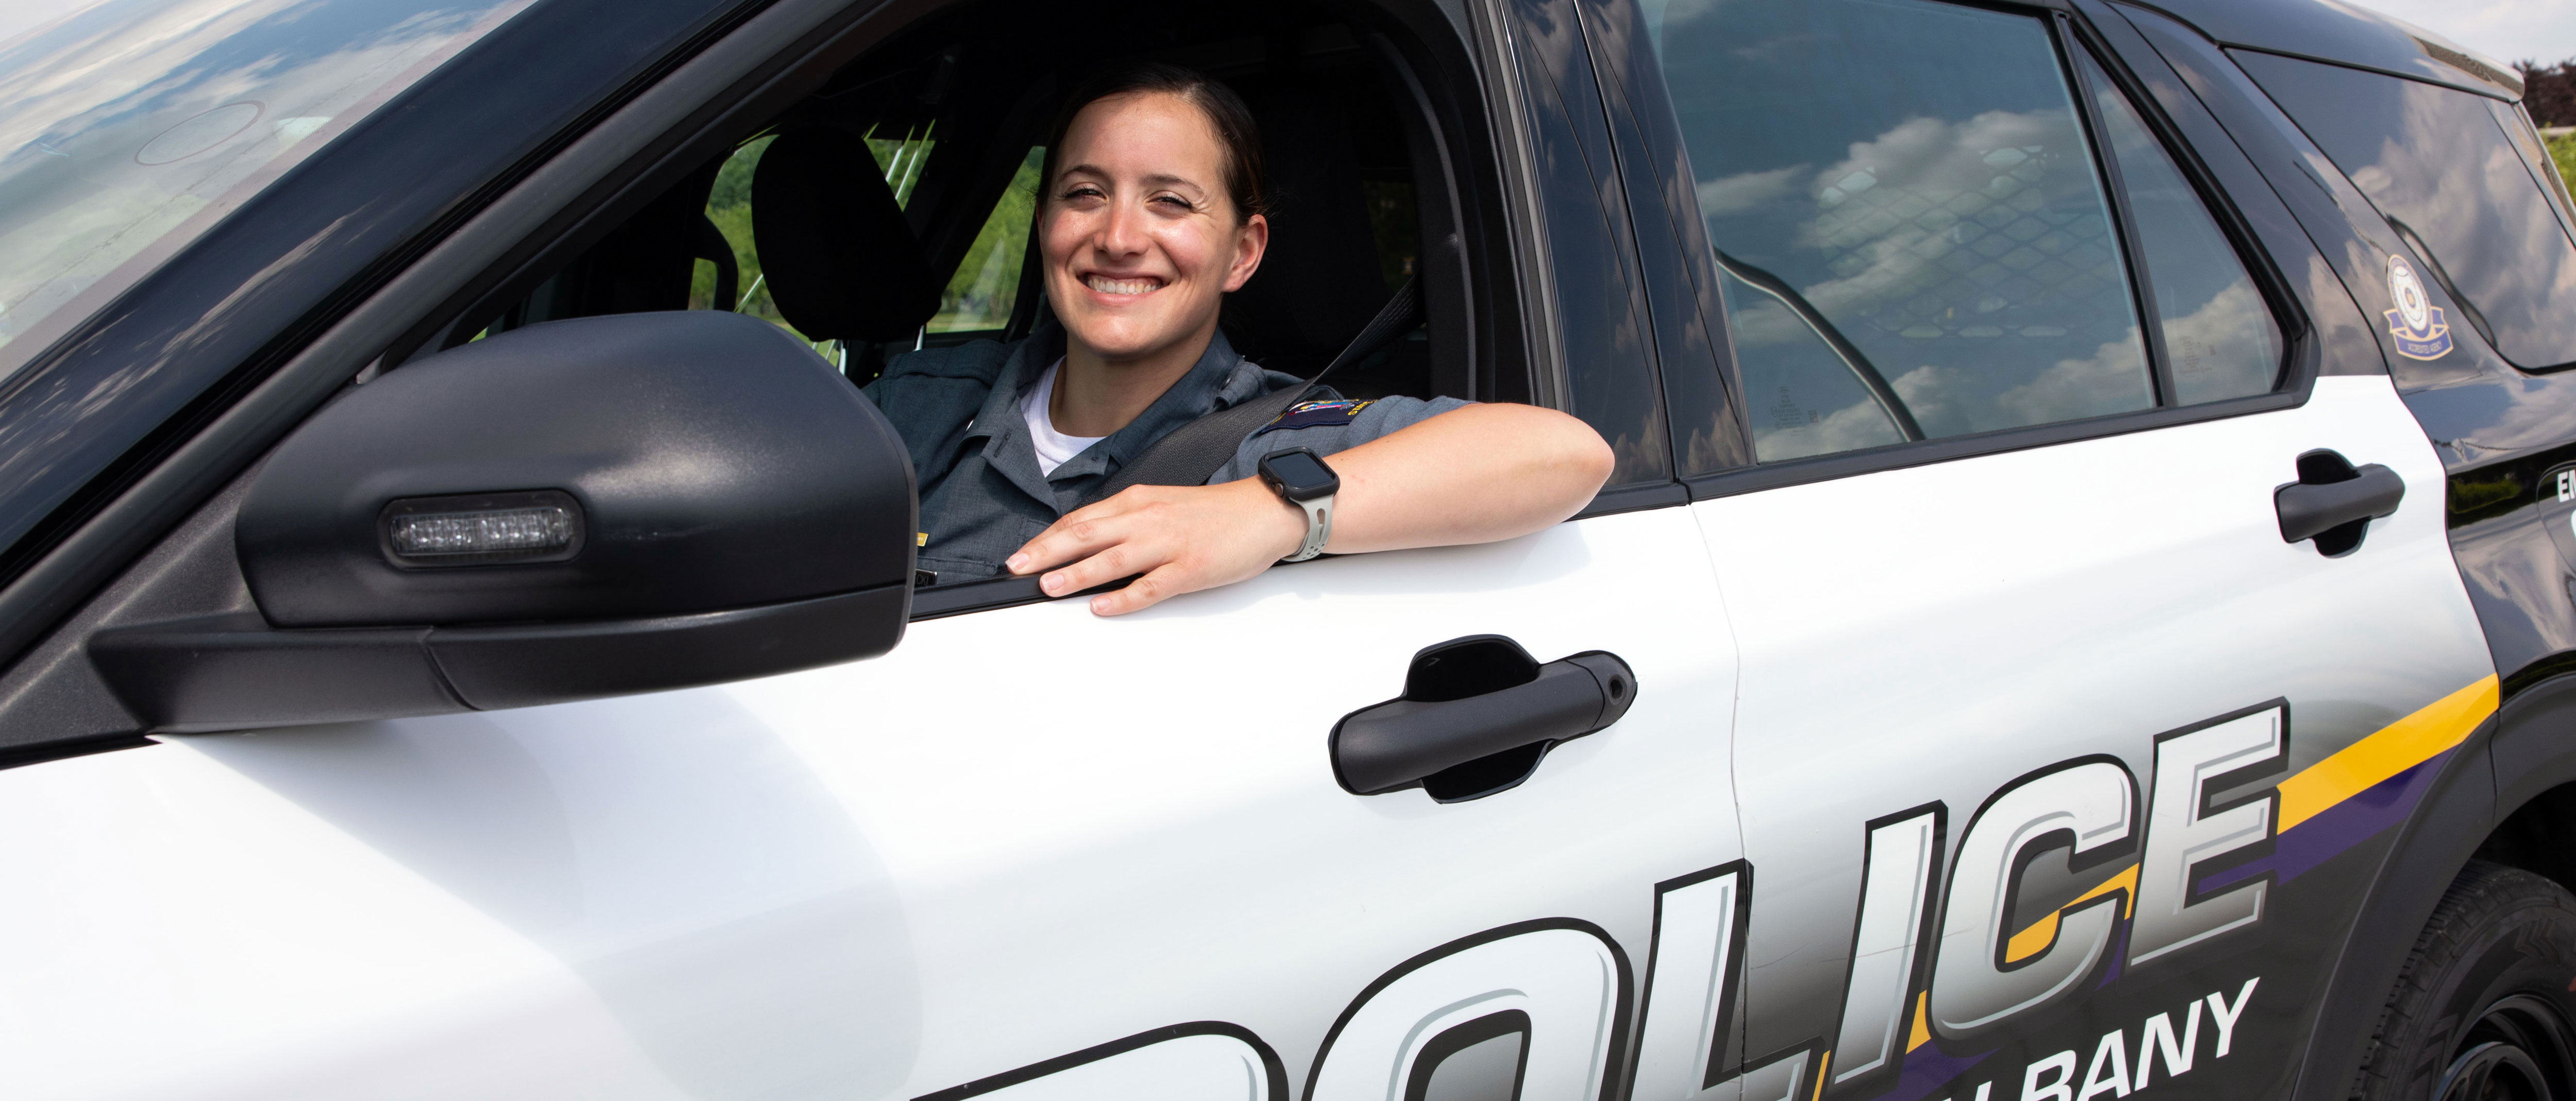 A smiling University police officer poses for a photo while seated inside her squad car.